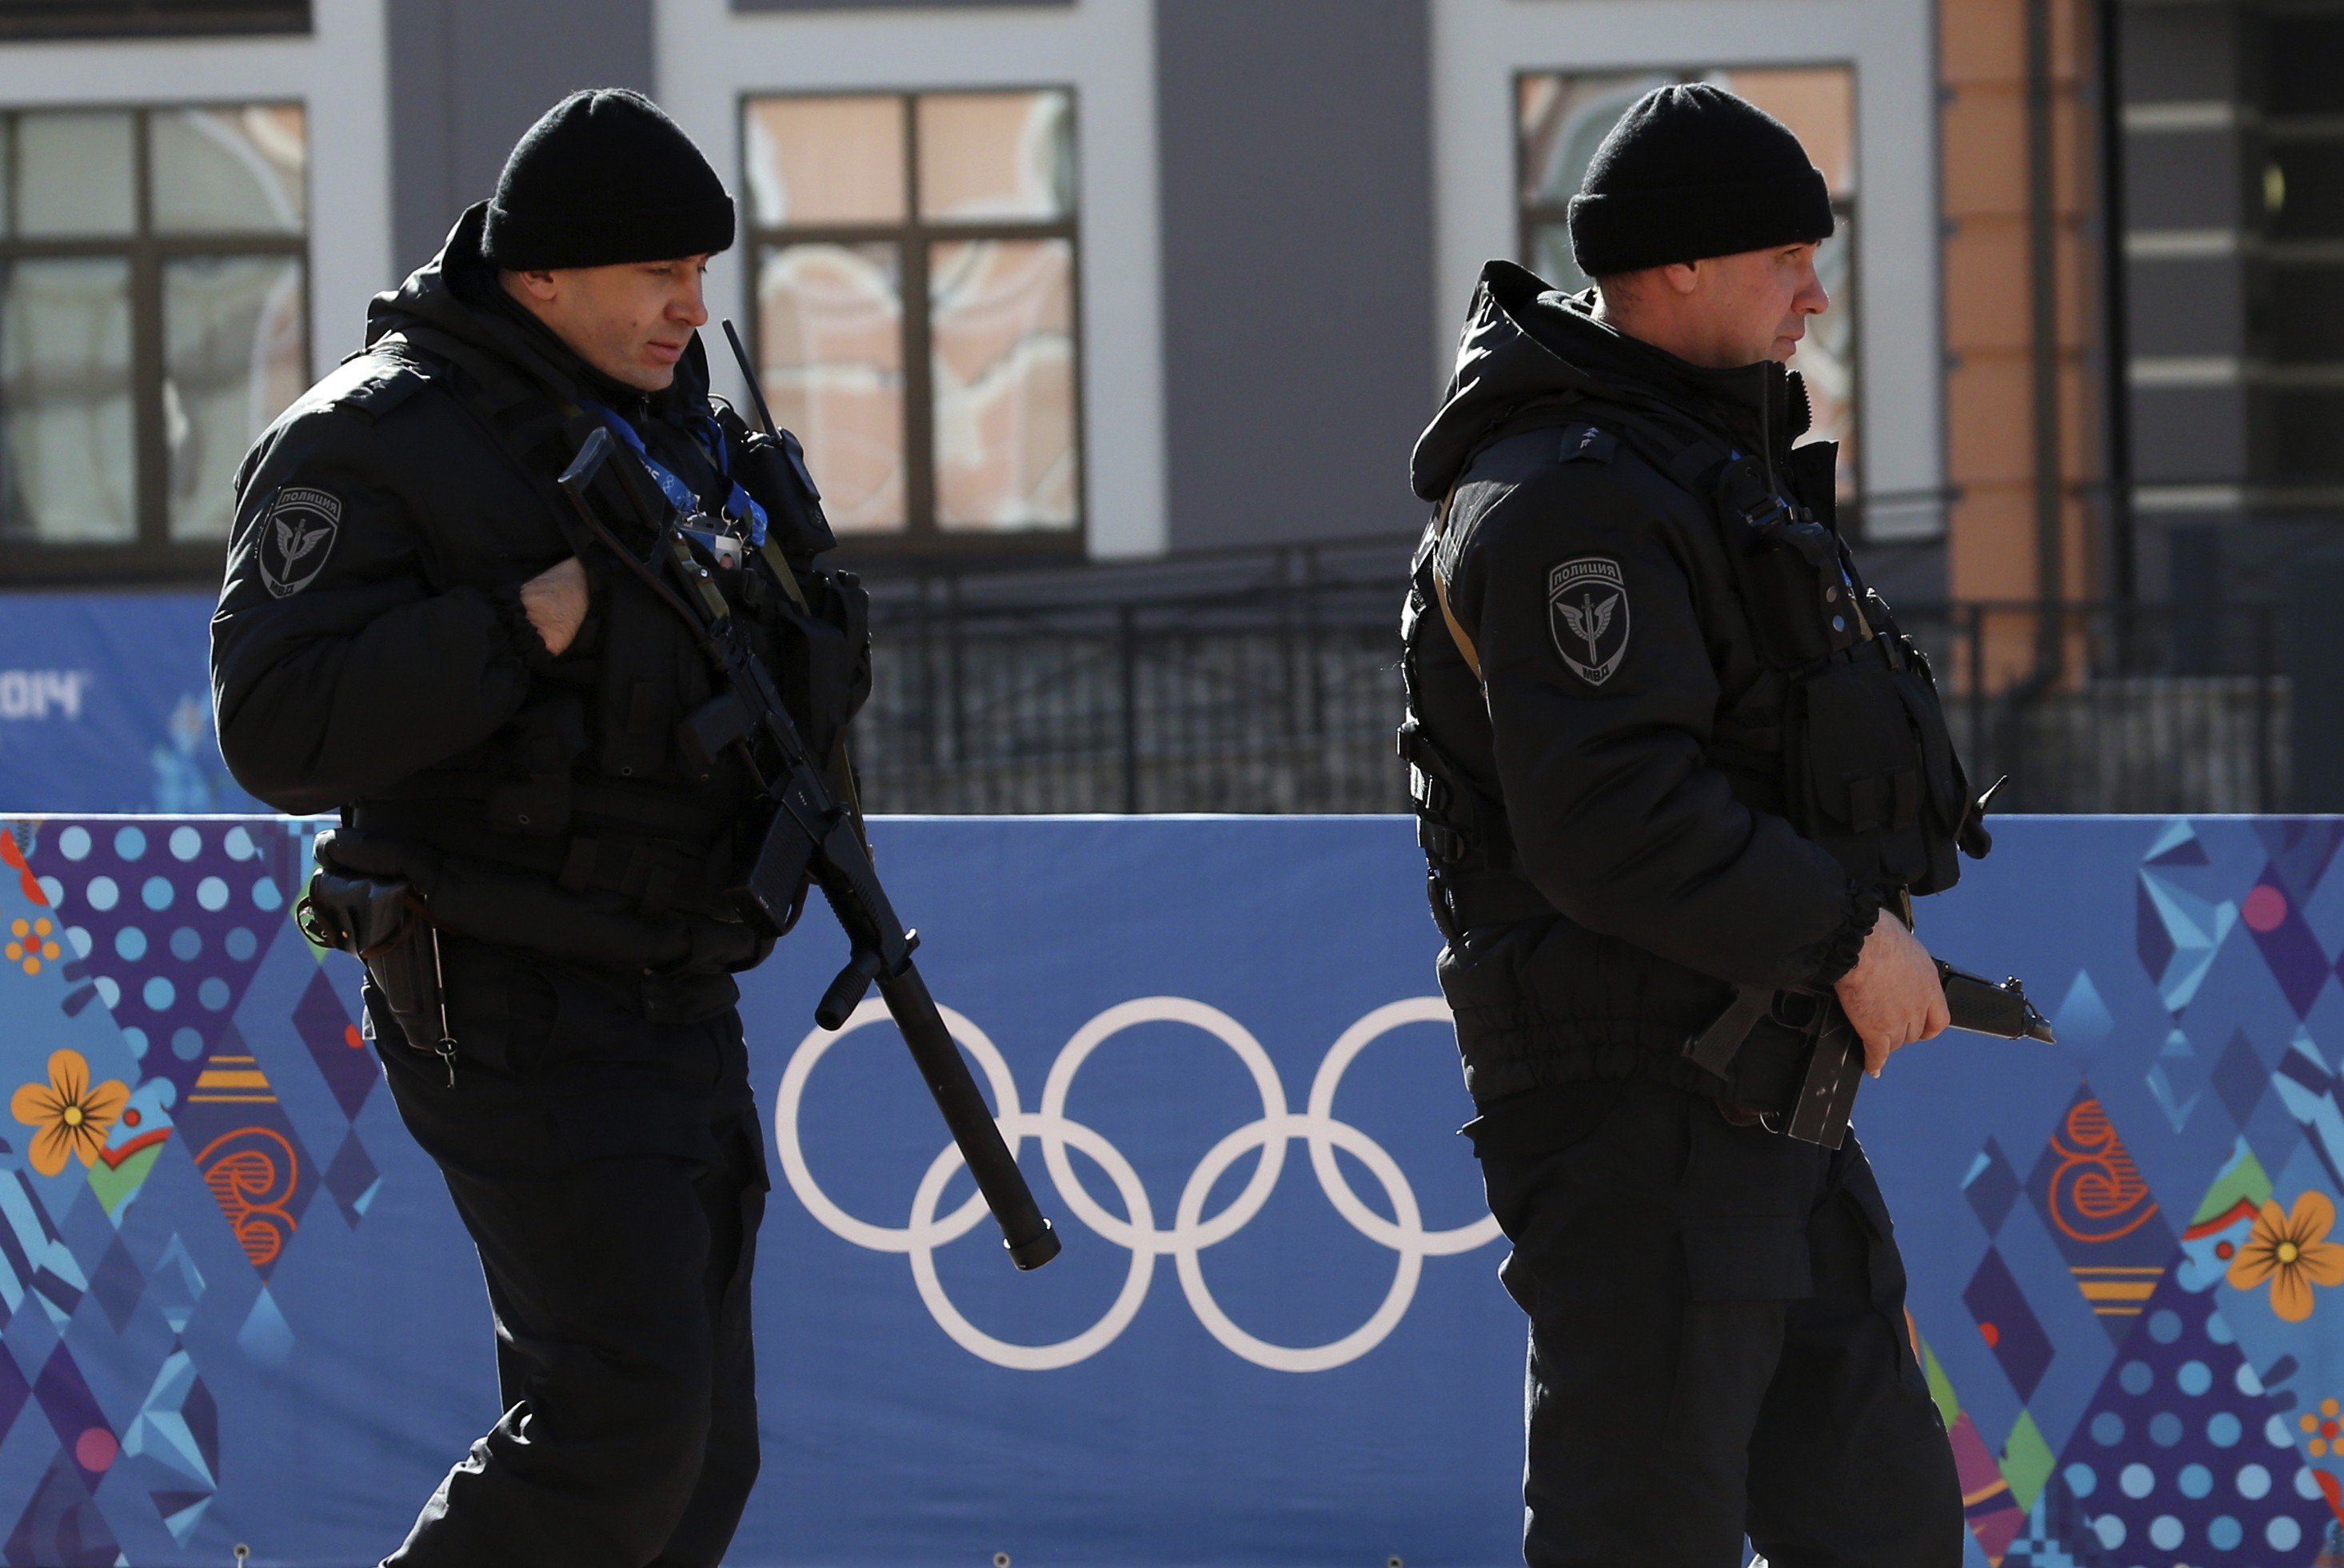 Russian security forces patrol the streets as preparations continue for the 2014 Sochi Winter Olympics in Rosa Khutor